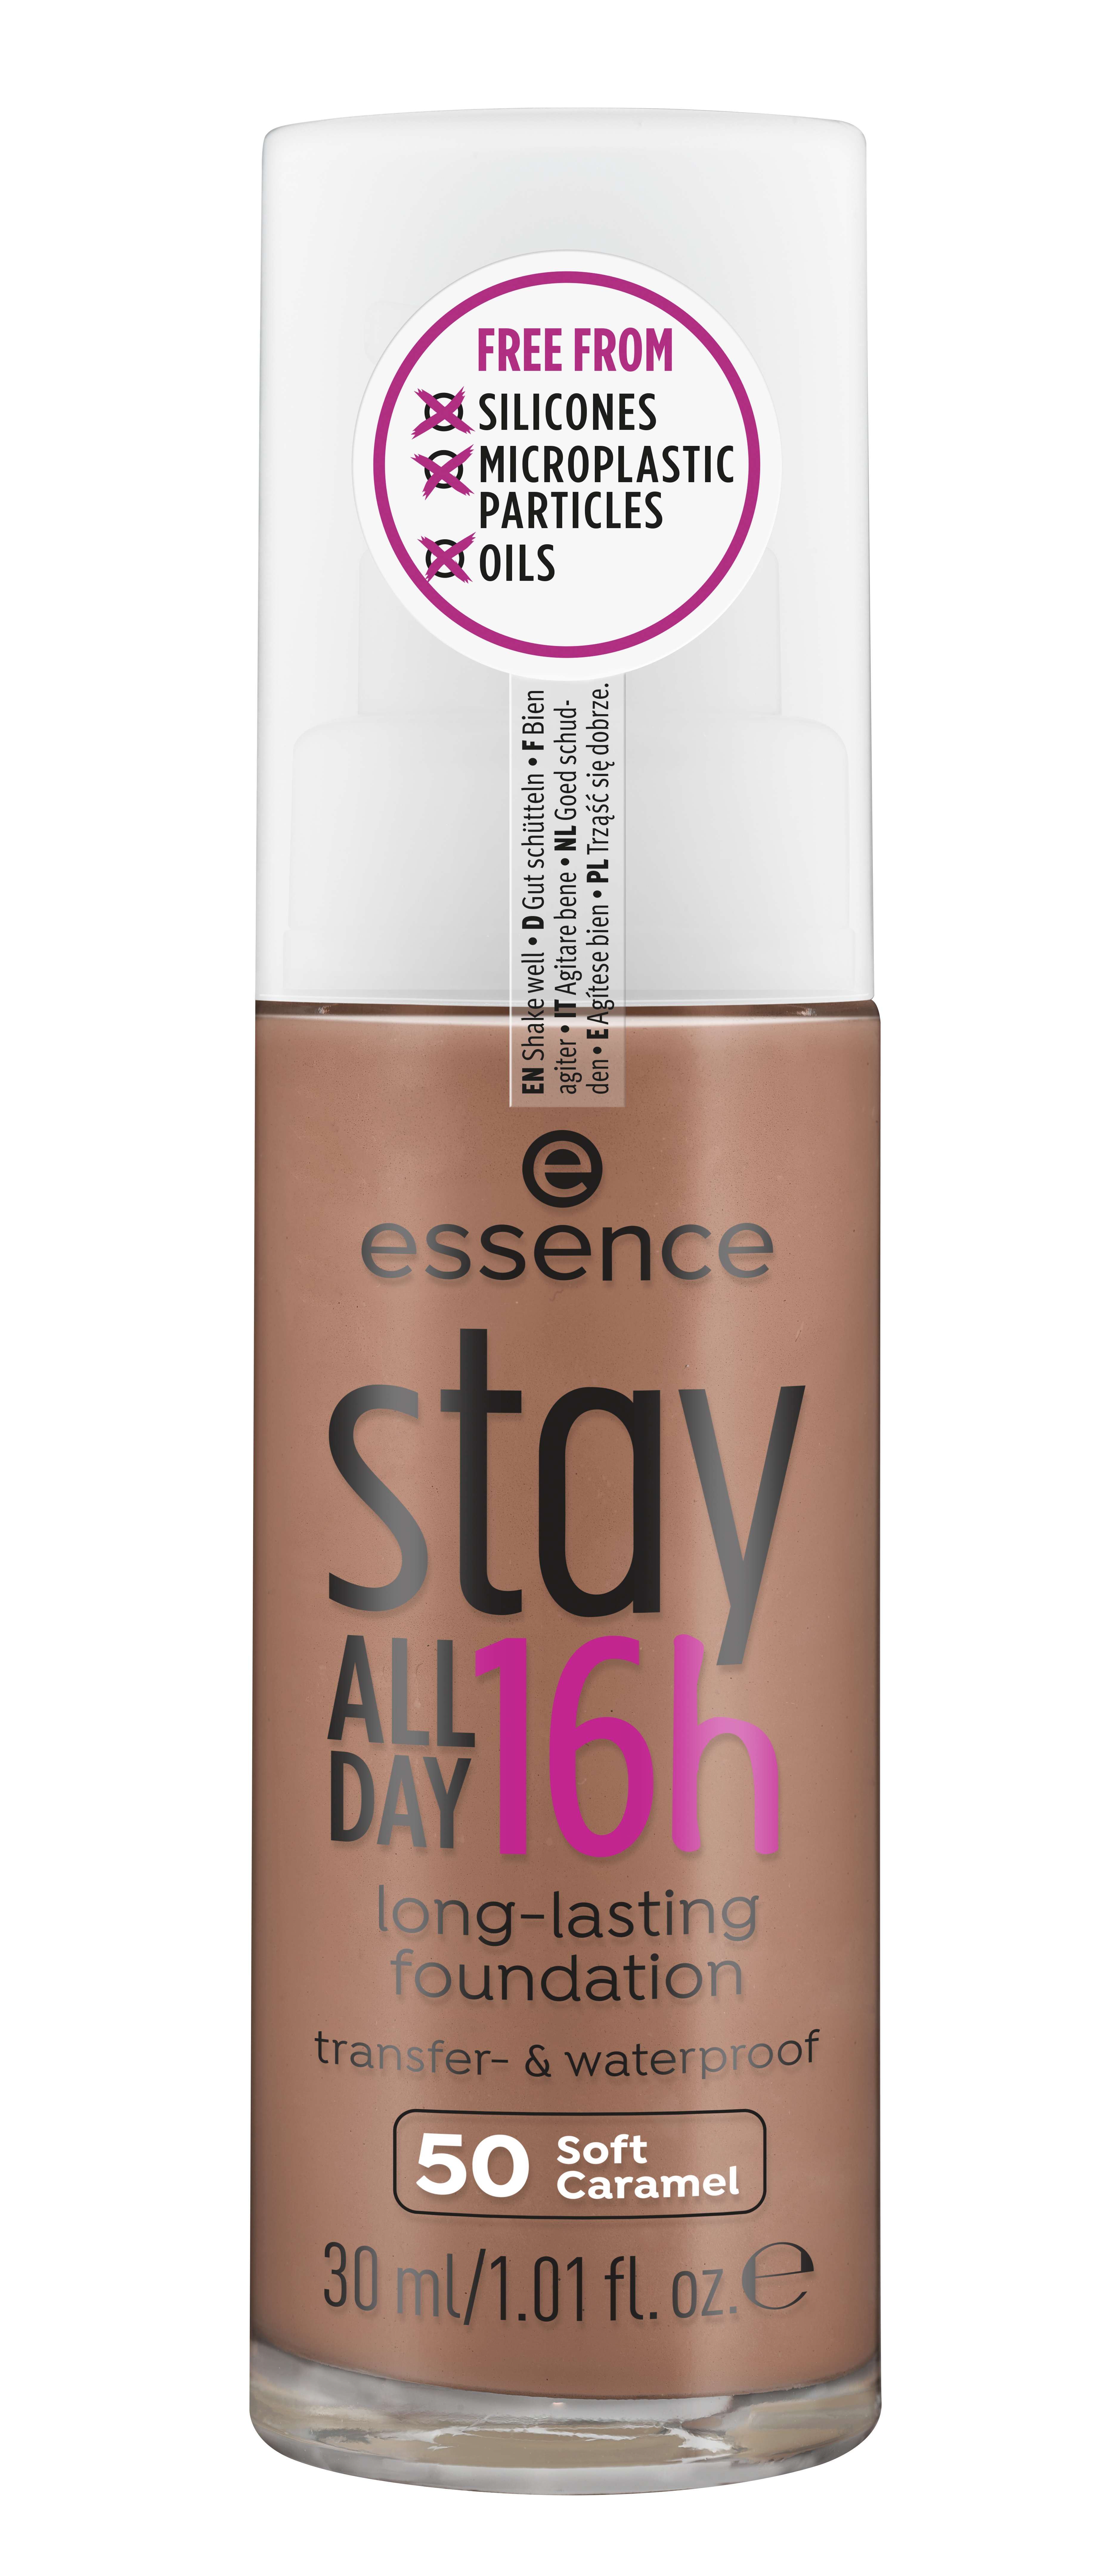 16h long-lasting all foundation Sand essence stay Soft 30 day